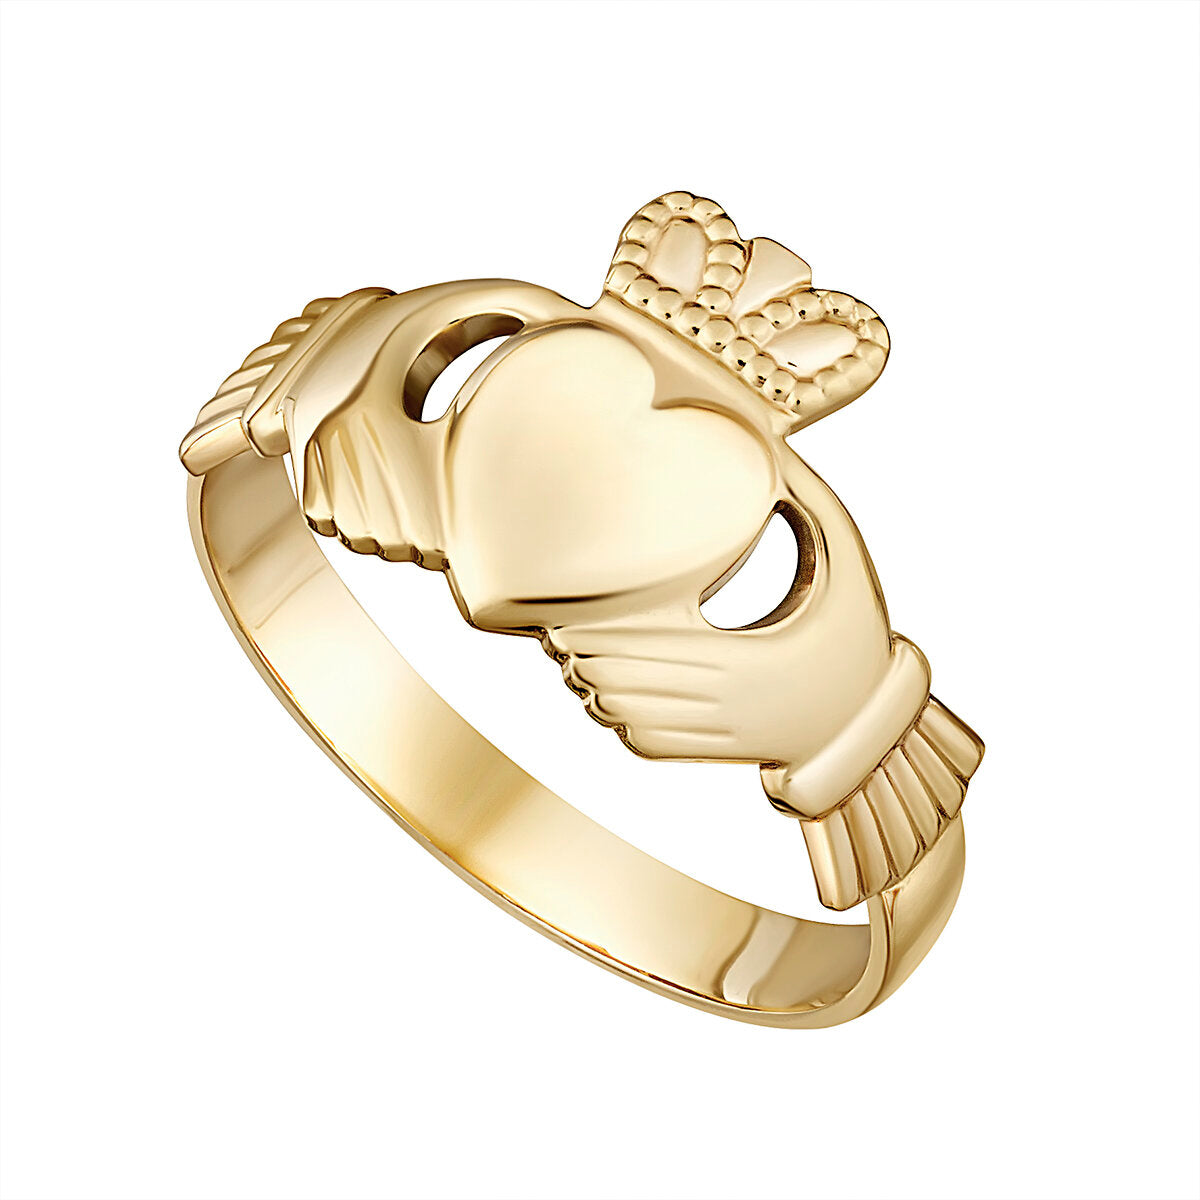 Men's 9ct Yellow Gold Claddagh Ring